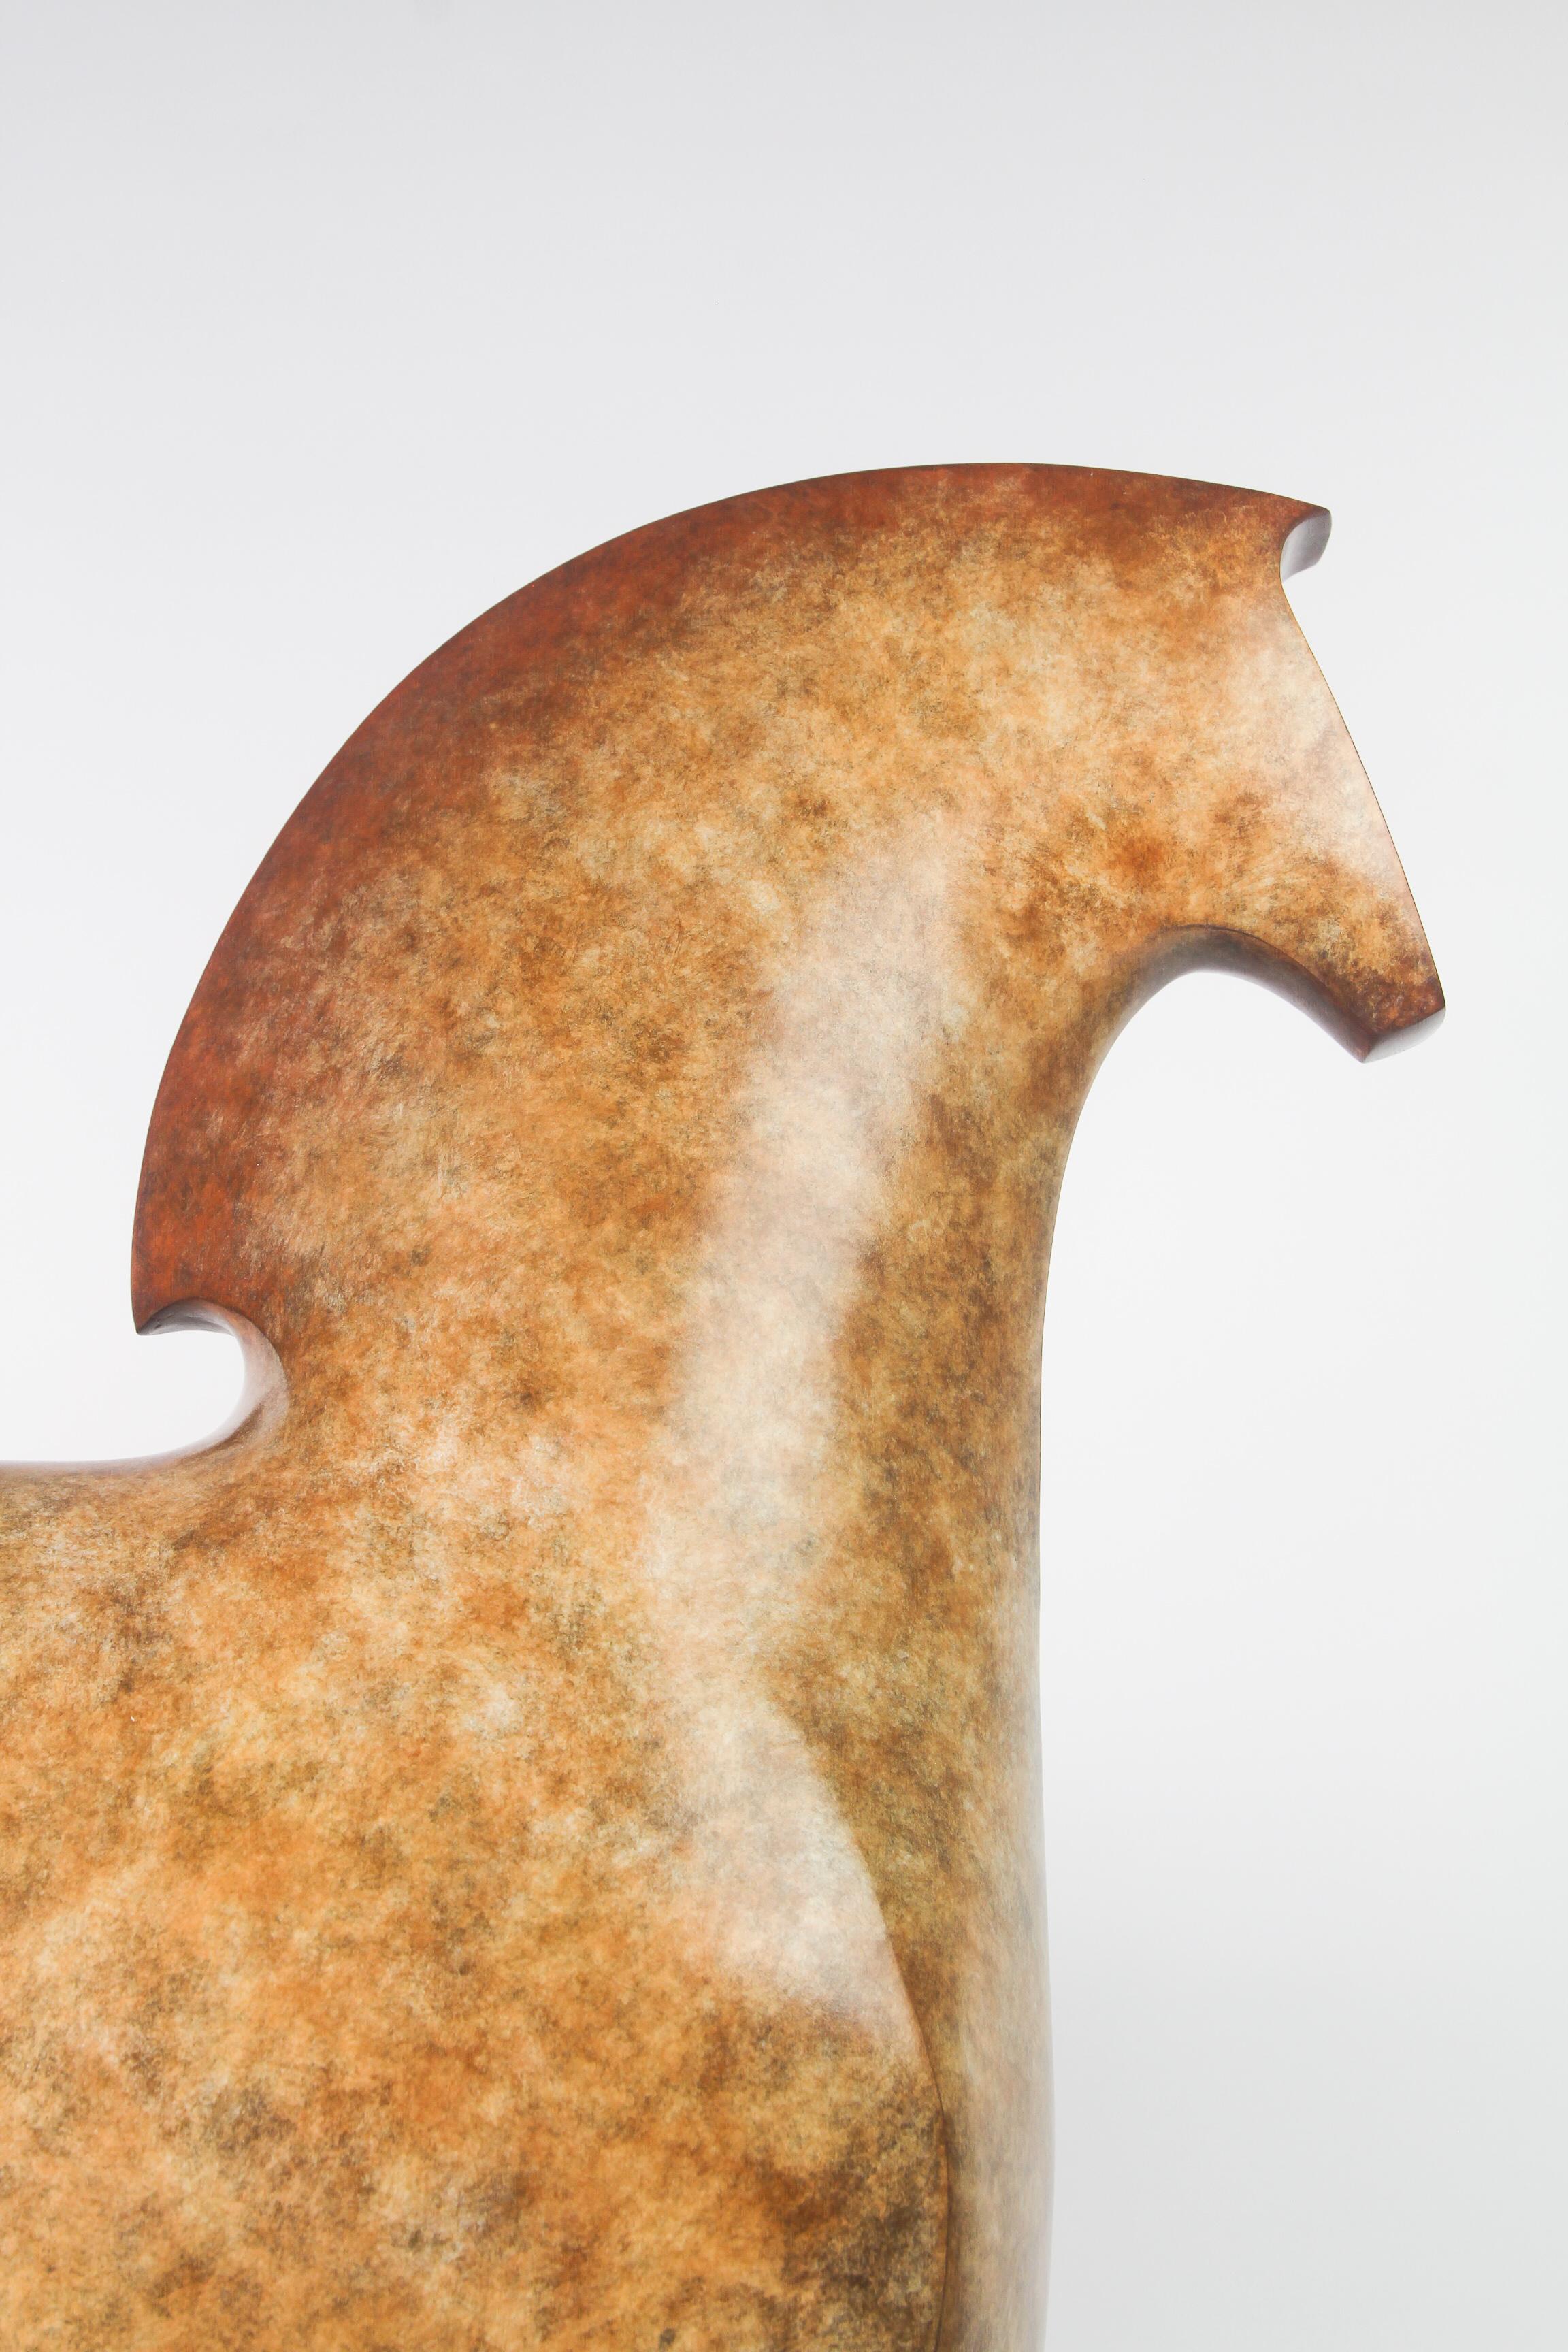 Hors - Gold Figurative Sculpture by Stephen Page